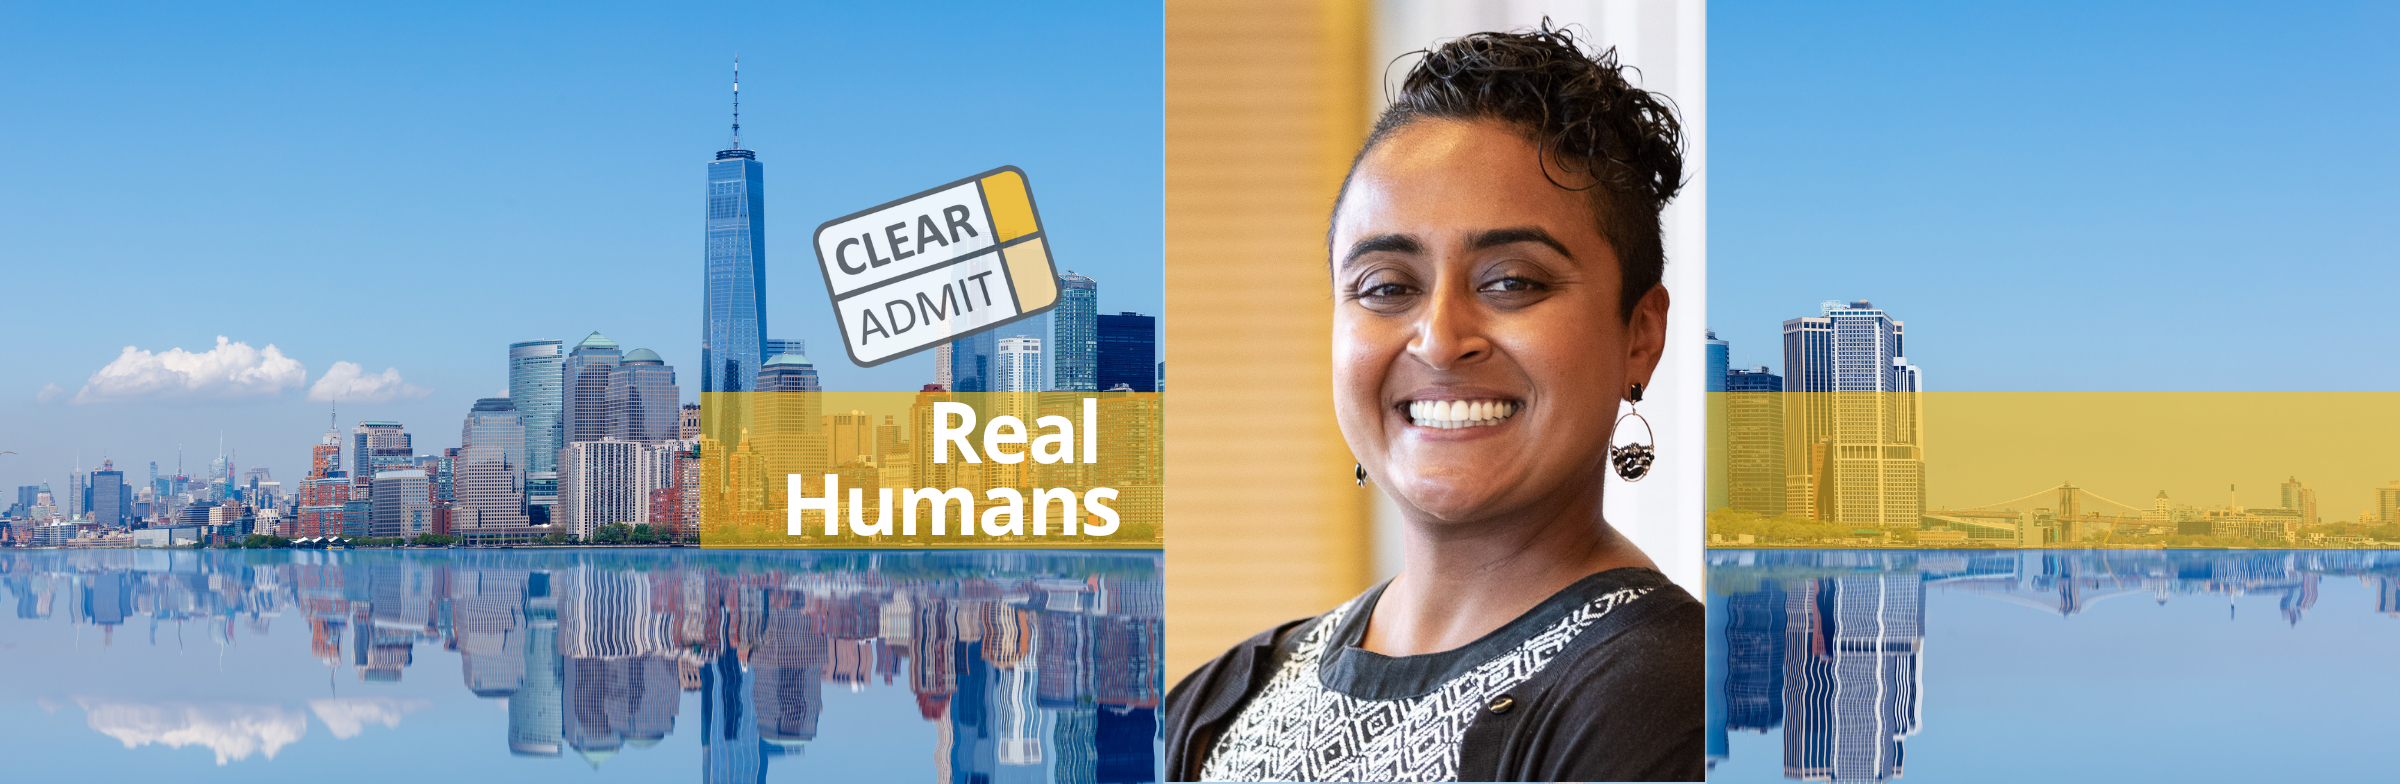 Image for Real Humans of Microsoft: Meera Venkataraman, Chicago Booth MBA ’20, Business Strategy Consultant